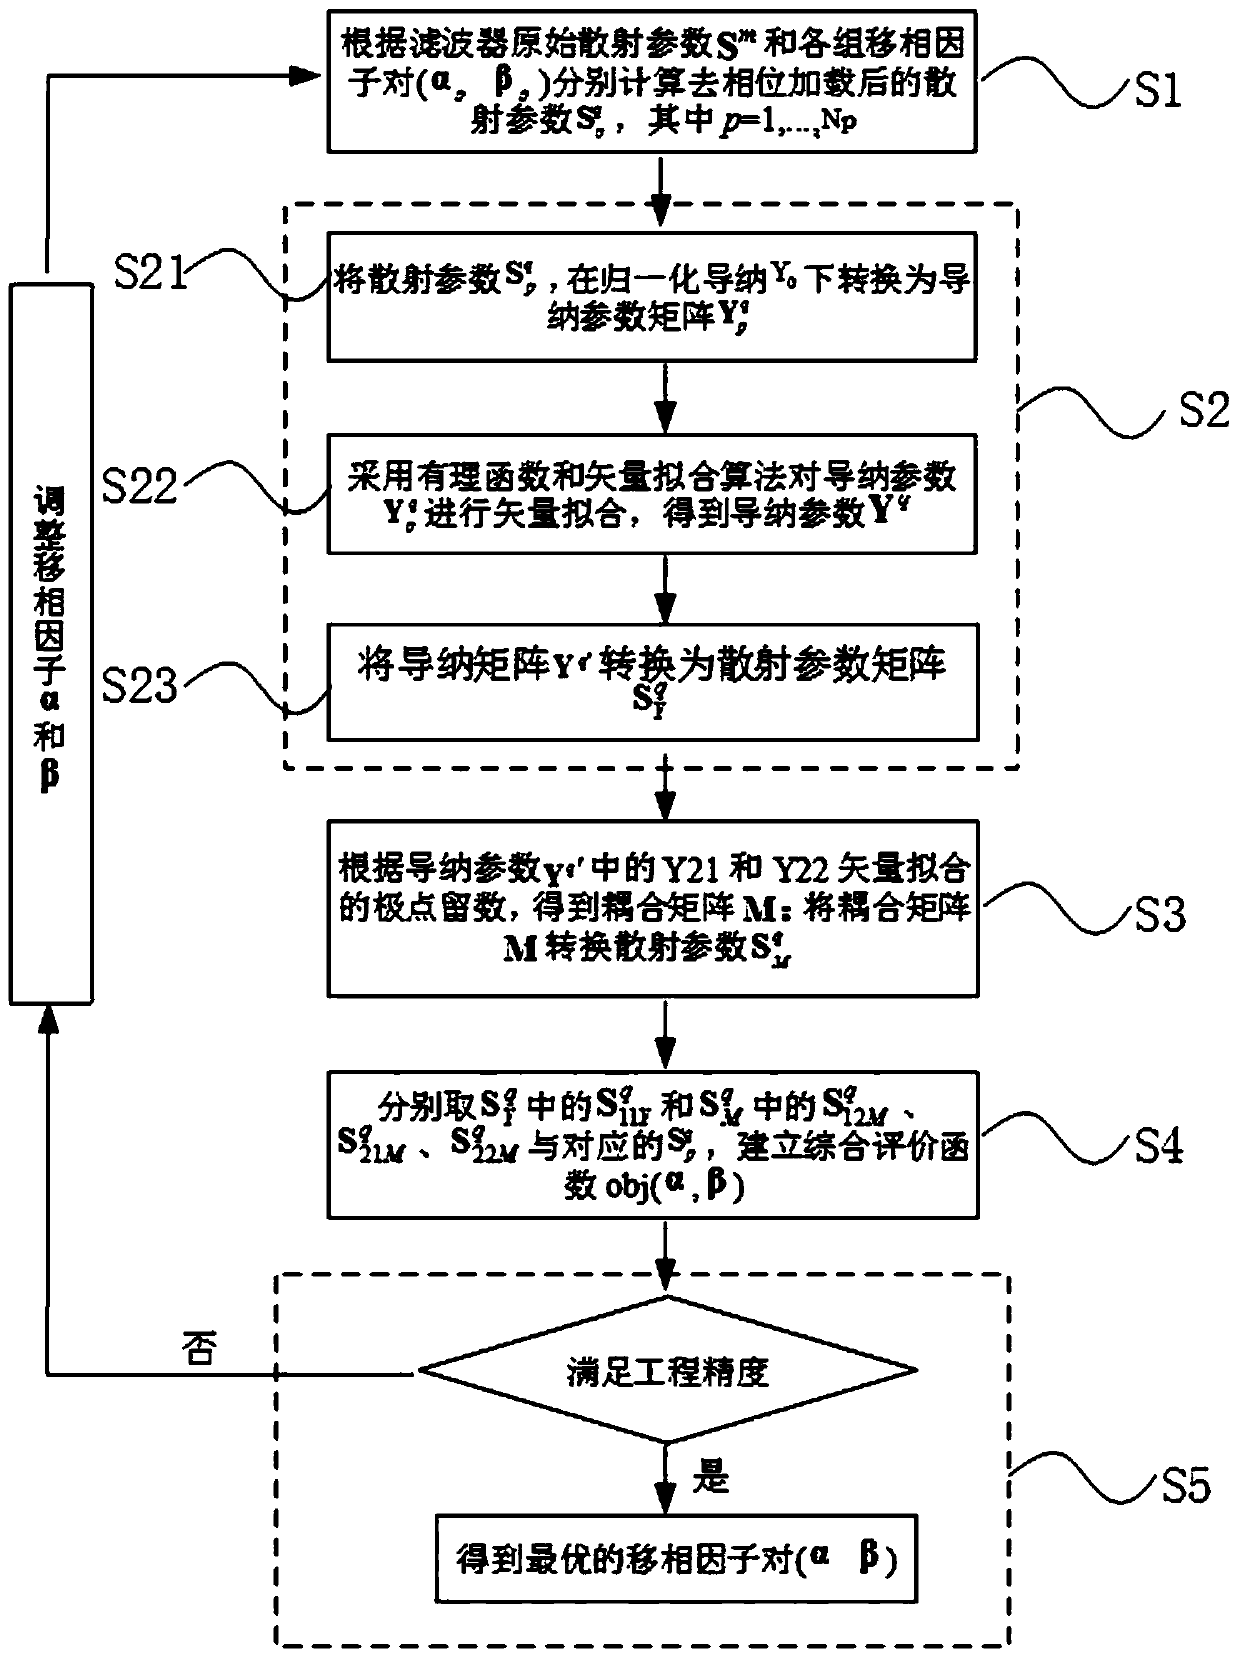 Filter S parameter dephasing loading method and system, medium and equipment